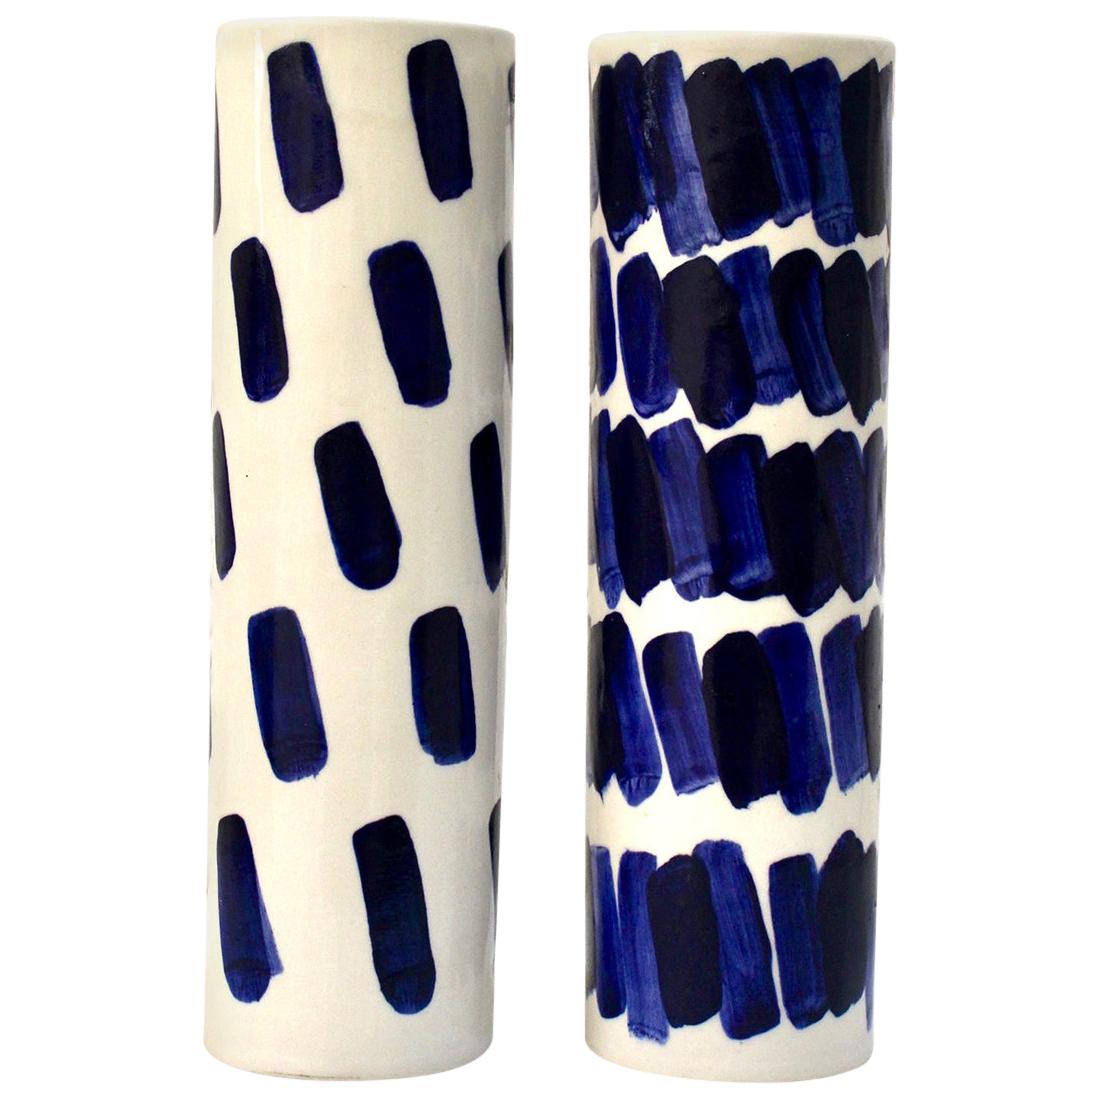 Pair of Rhythm Vases by Isabel Halley, in White Porcelain with Cobalt Glaze